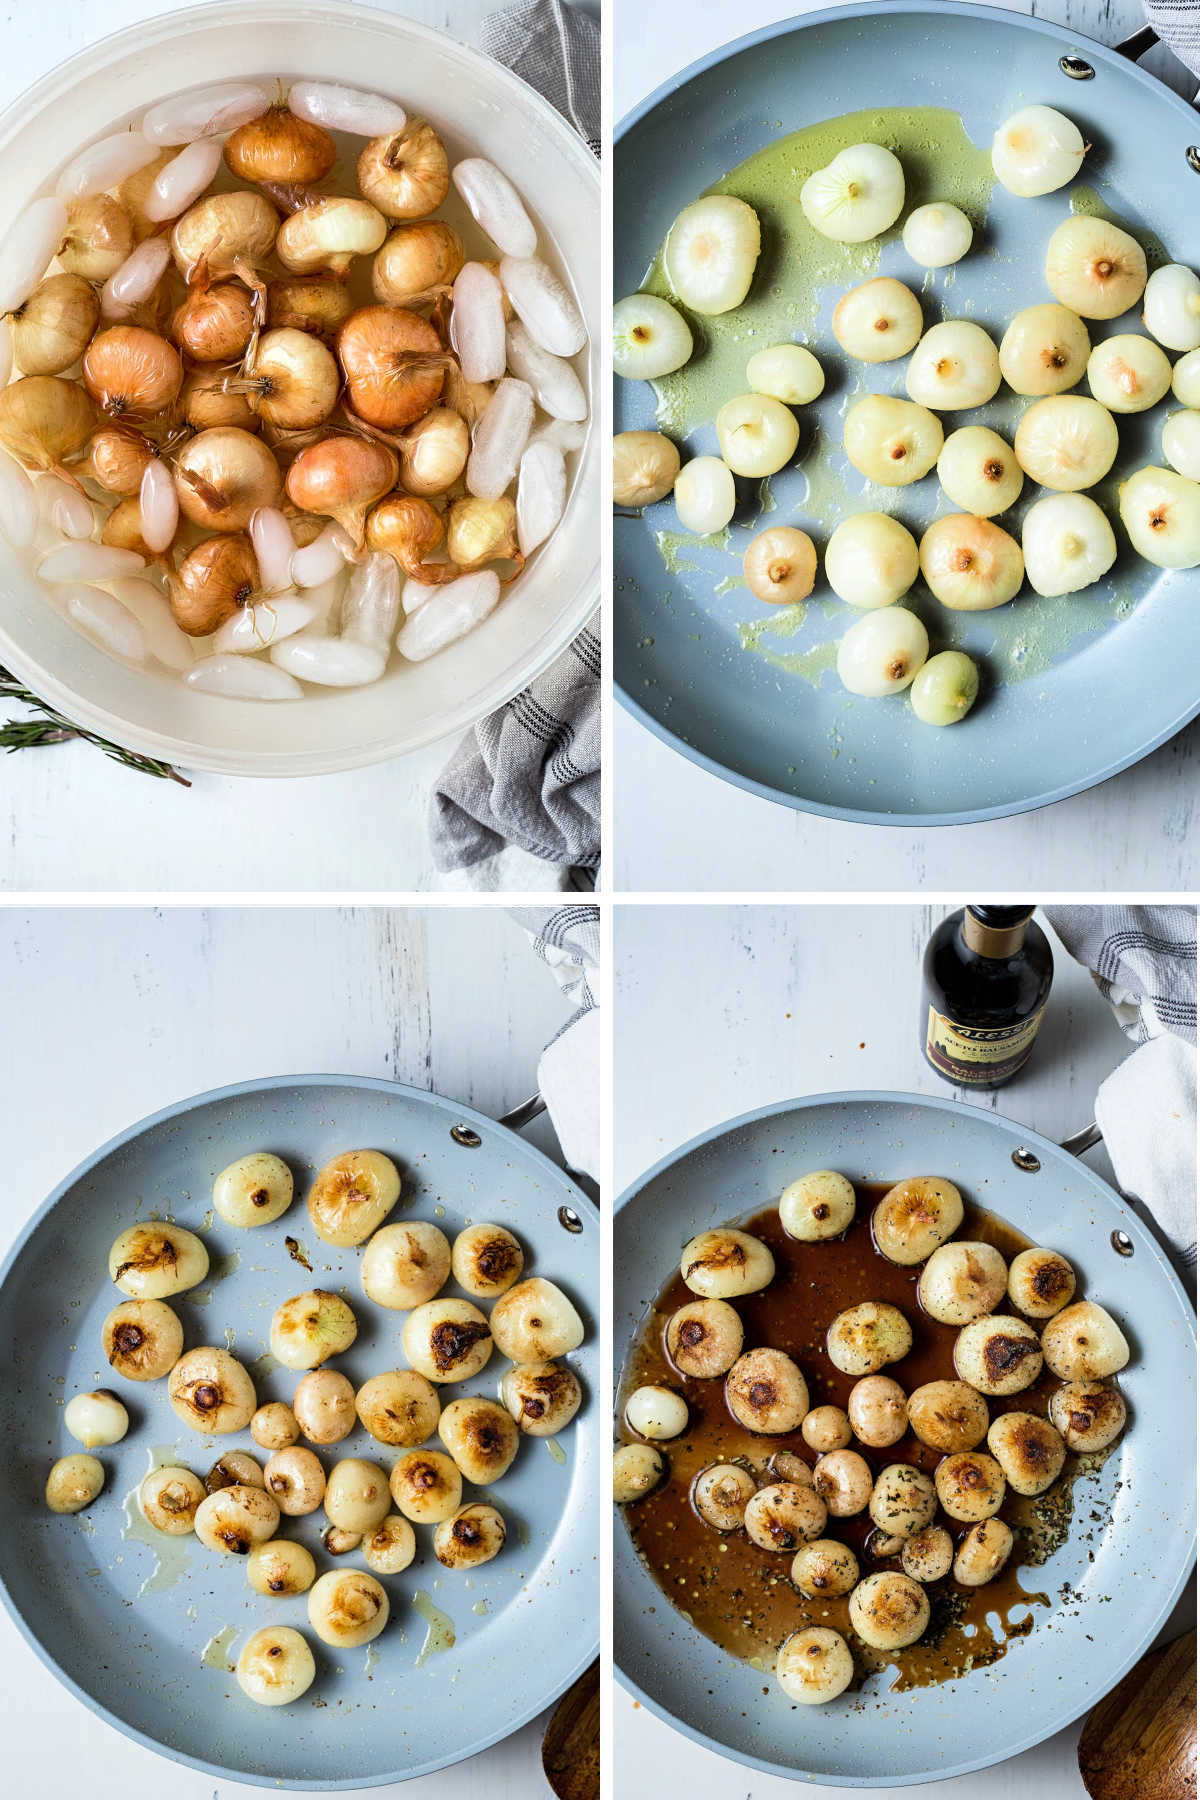 process steps for making glazed cipolline onions: soak in ice water; saute in olive oil and butter; browned onions; add balsamic vinegar and rosemary.